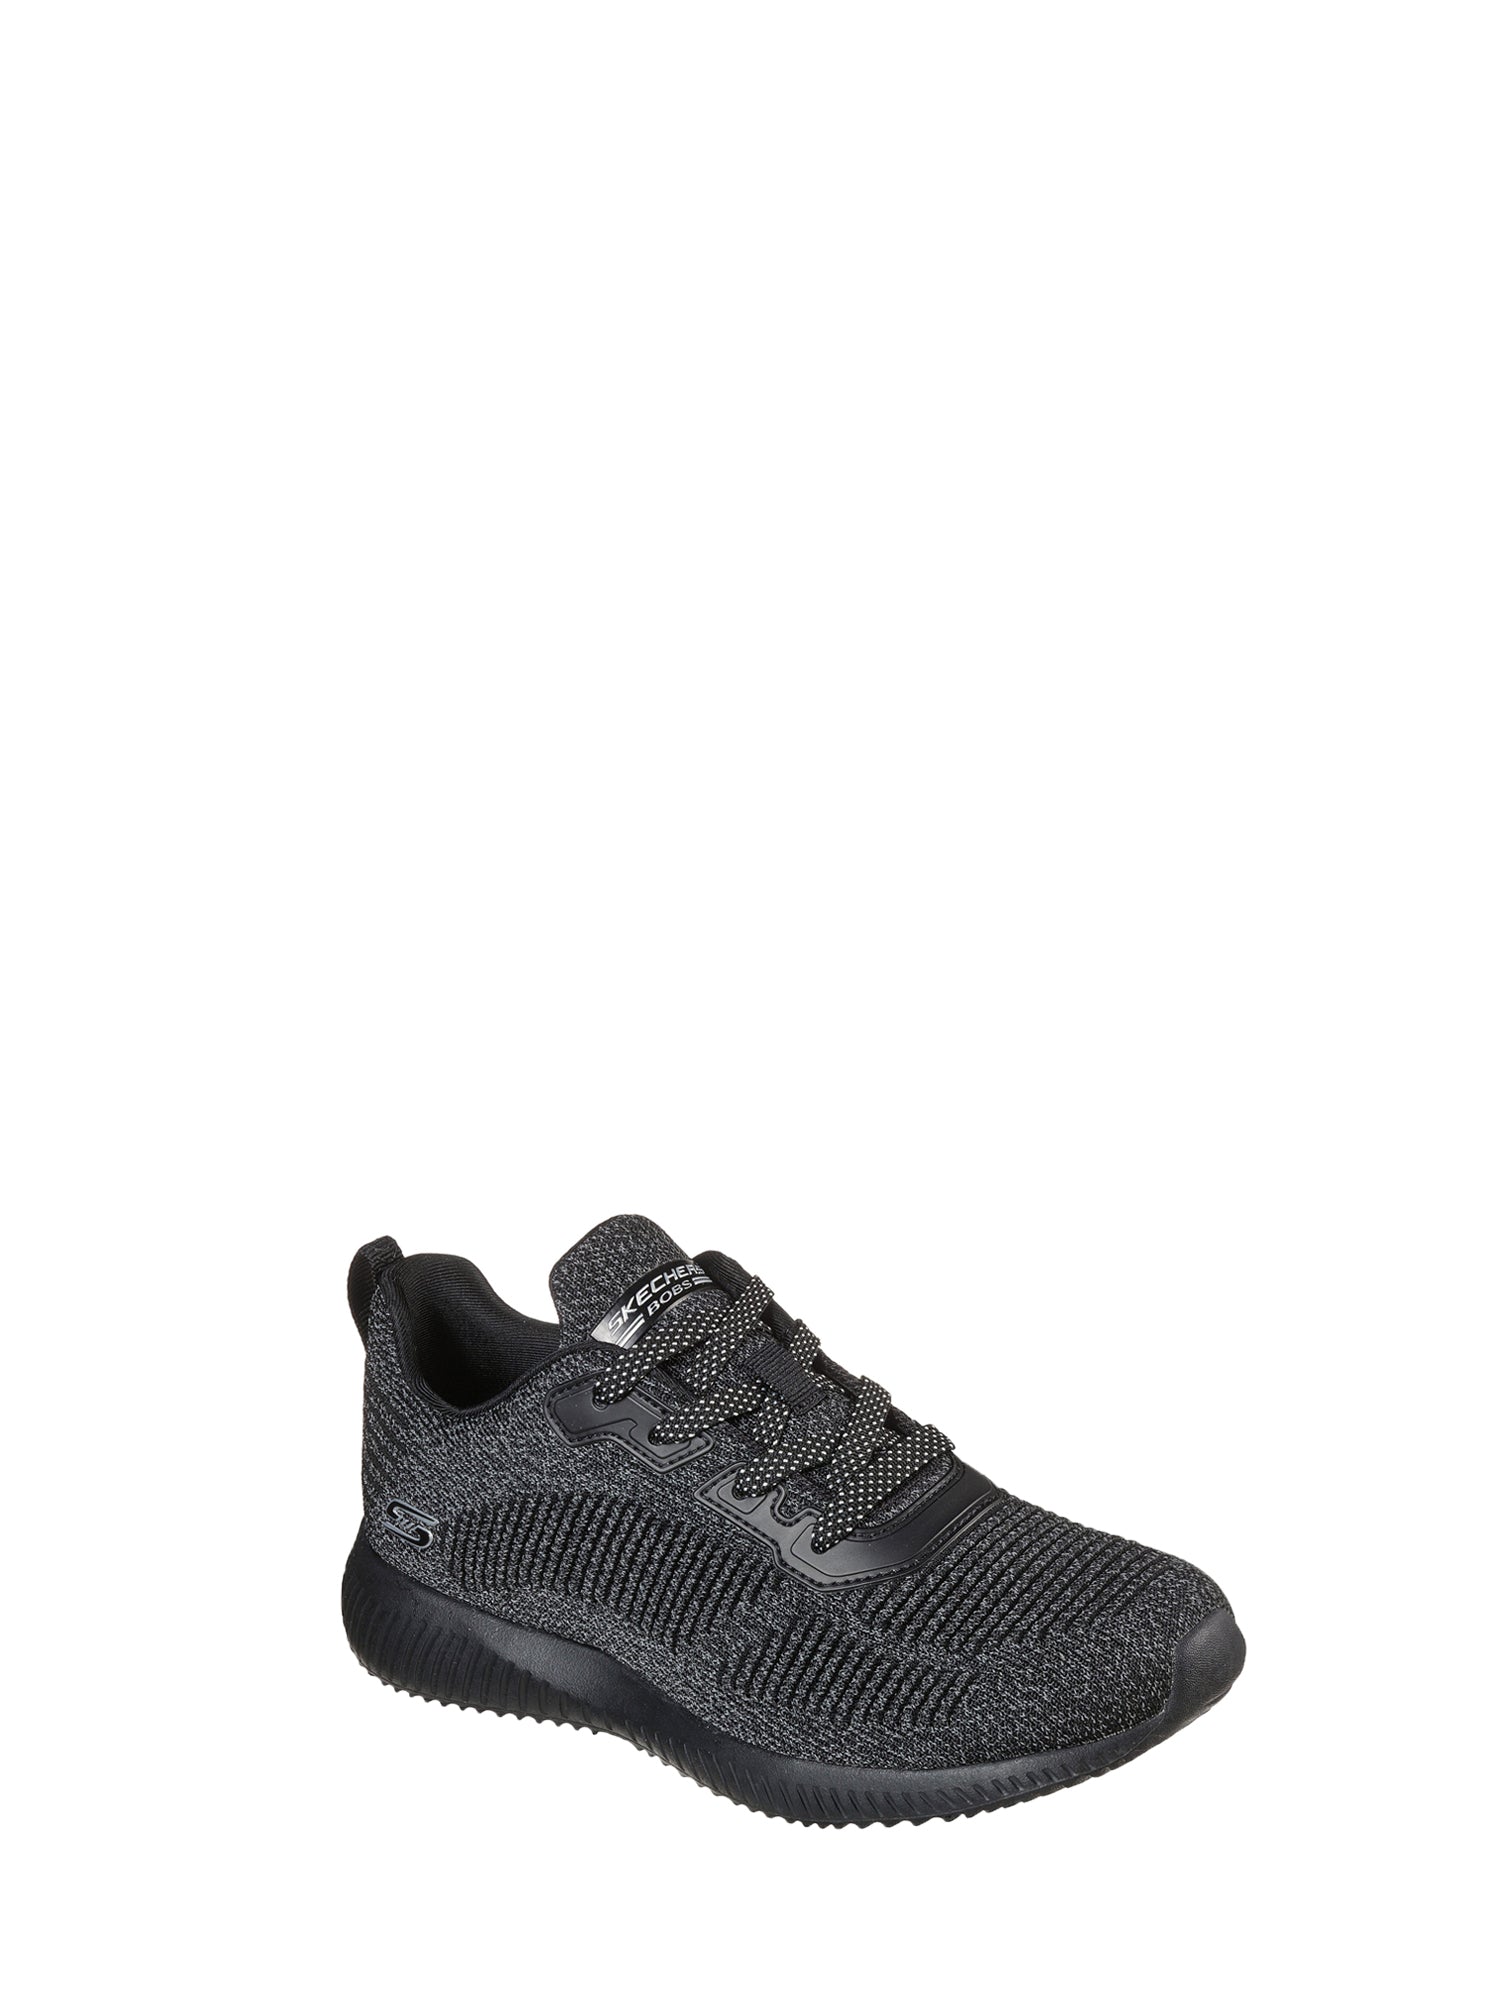 SKECHERS SNEAKERS BOBS SQUAD-GHOST STAR NERO